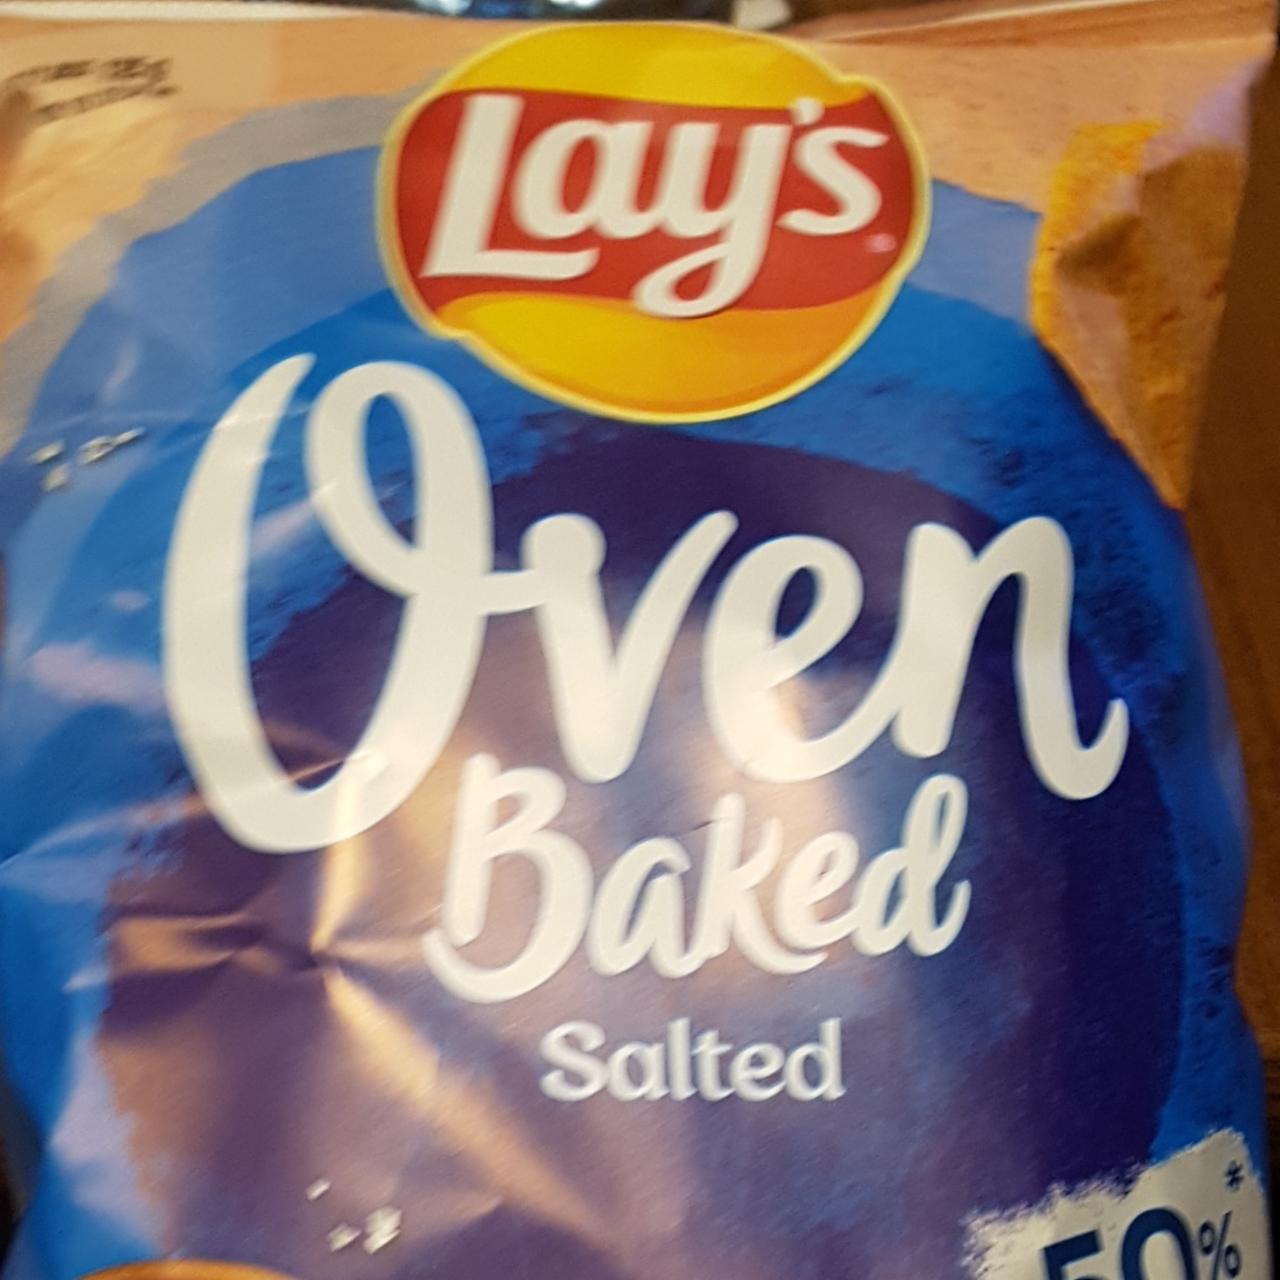 Zdjęcia - Chipsy oven baked salted lay's